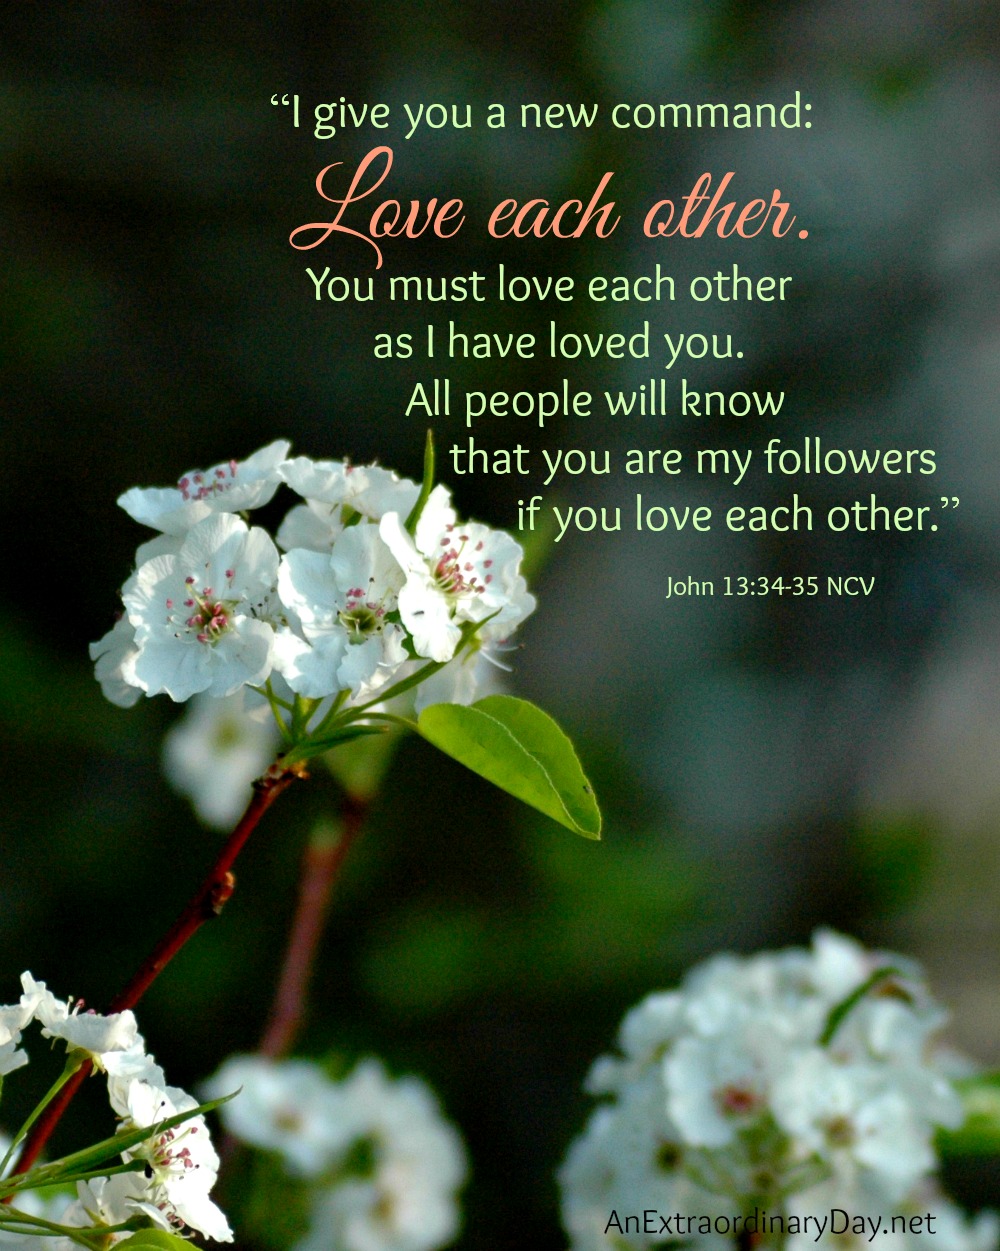 How do you want to be remembered? :: Love each other - John 13:34-35 :: AnExtraordinaryDay.net